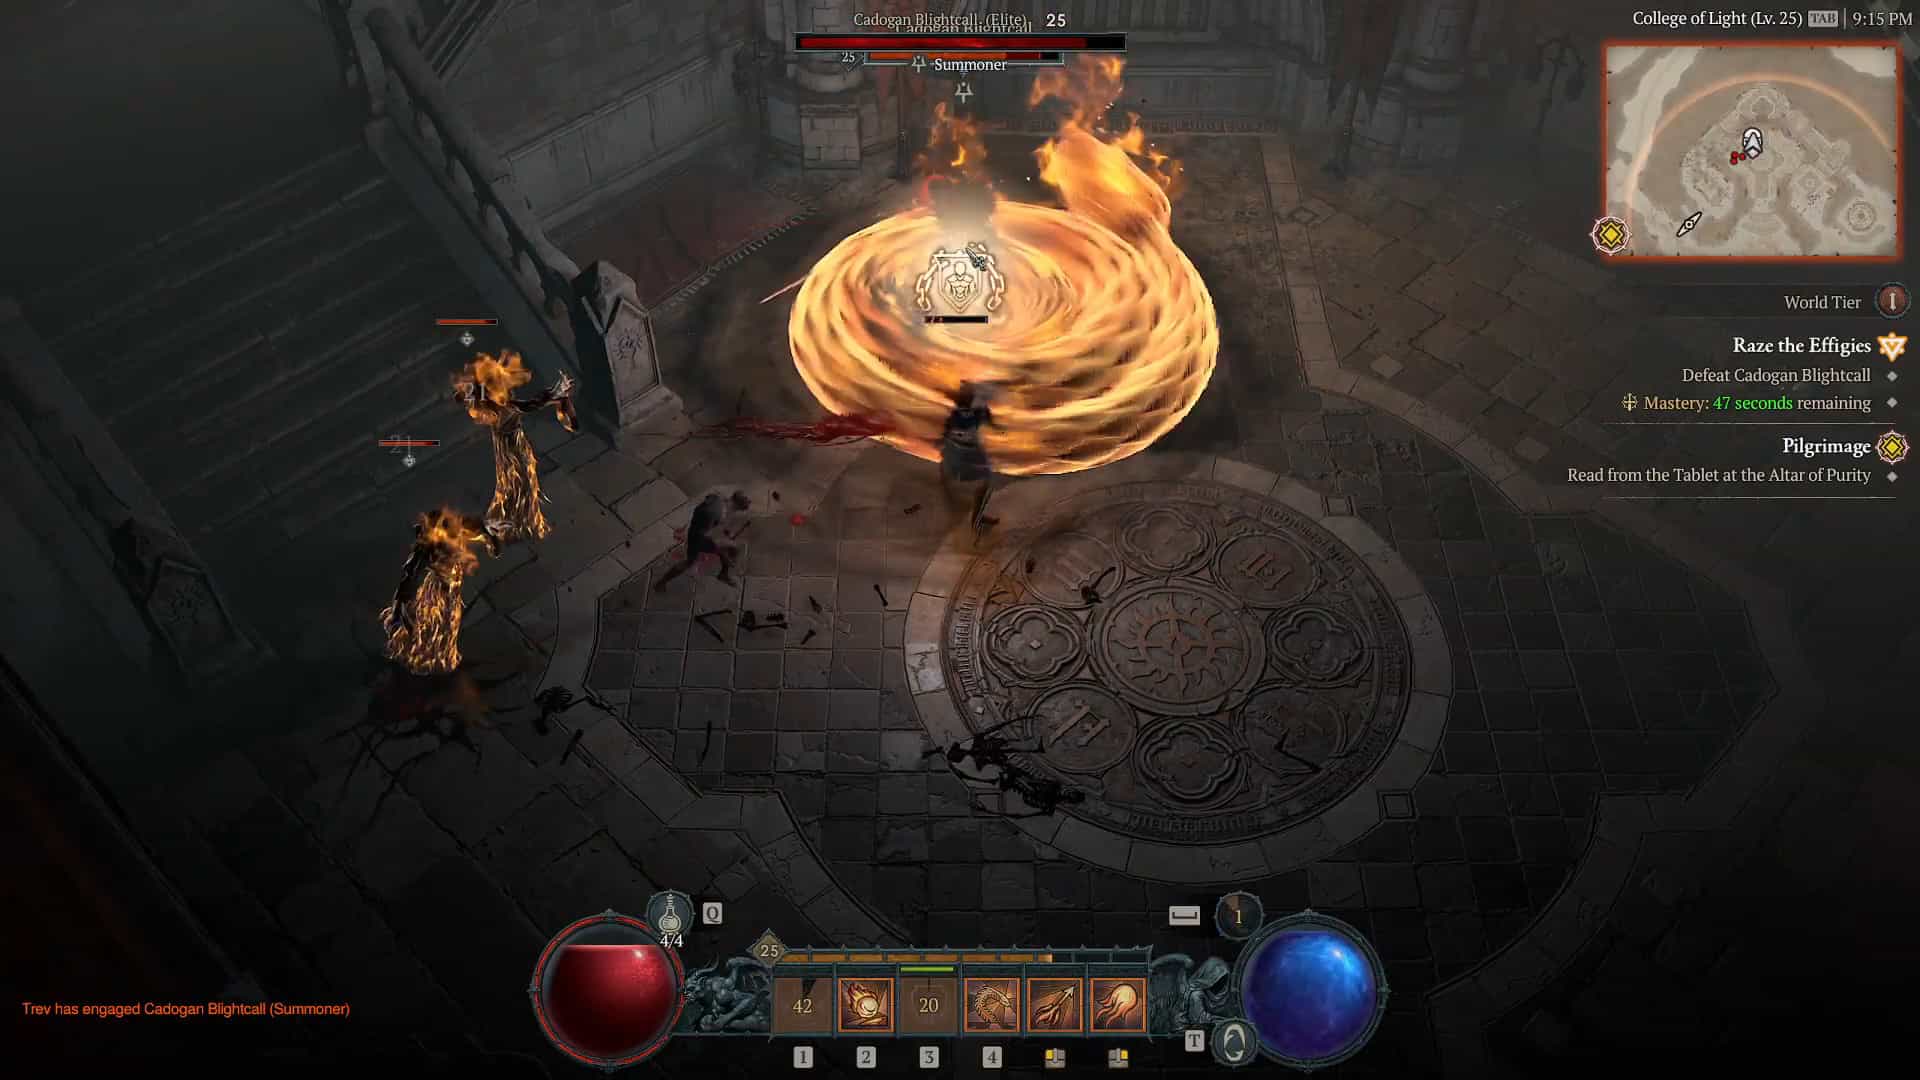 All Diablo 4 events in Season 1: An image of a player completing the Raze the Effigies event in the game.